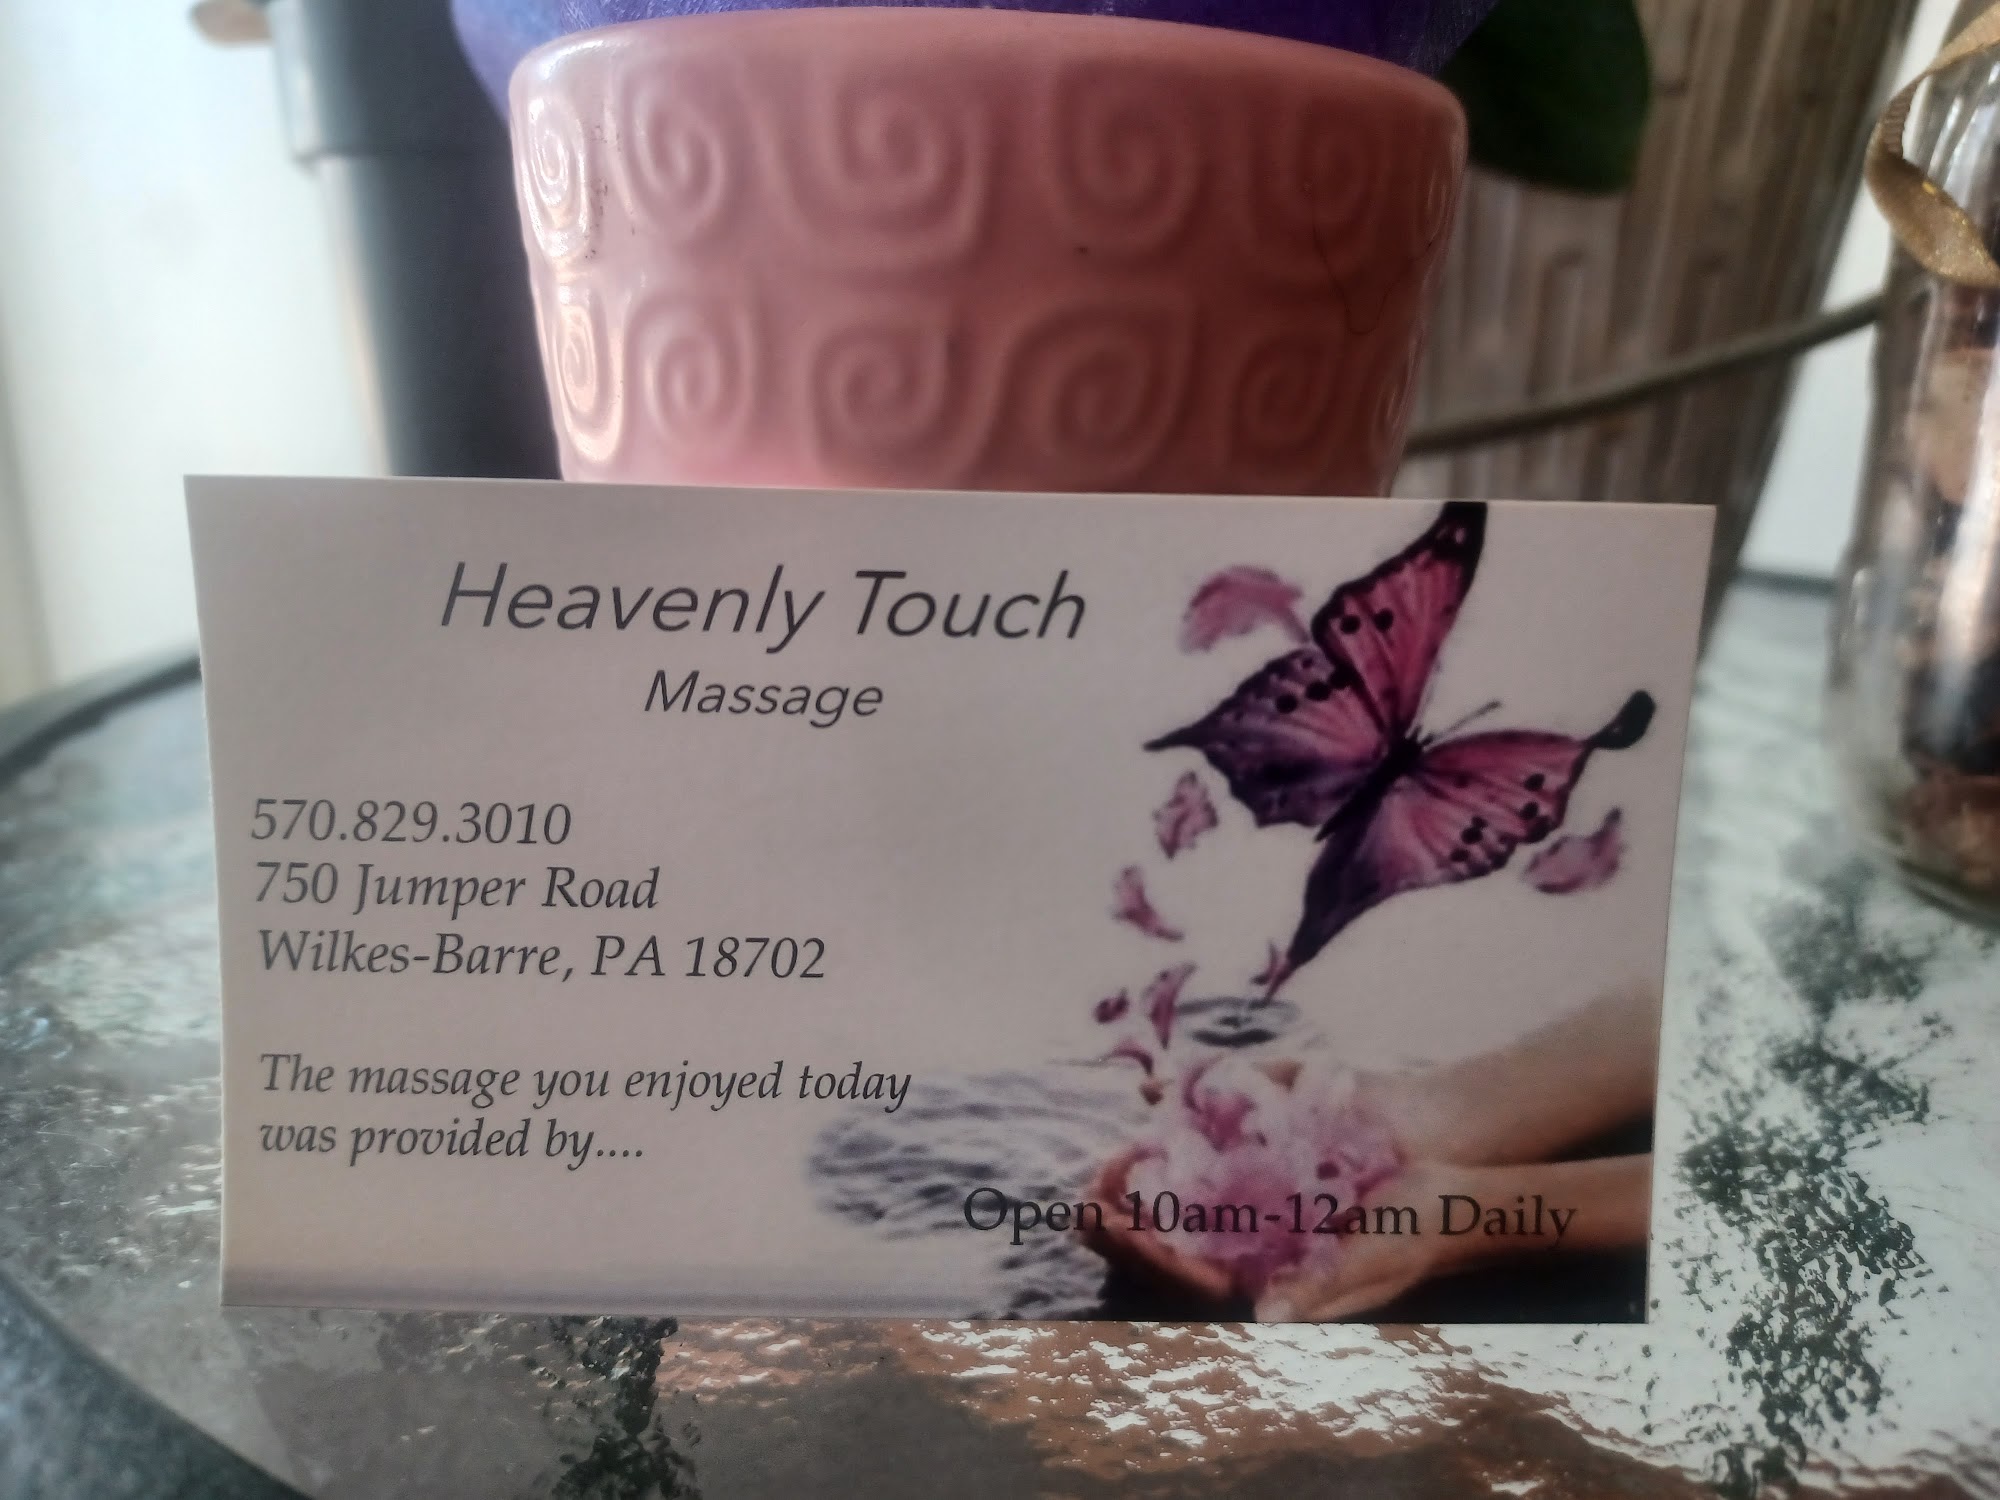 Heavenly touch massage